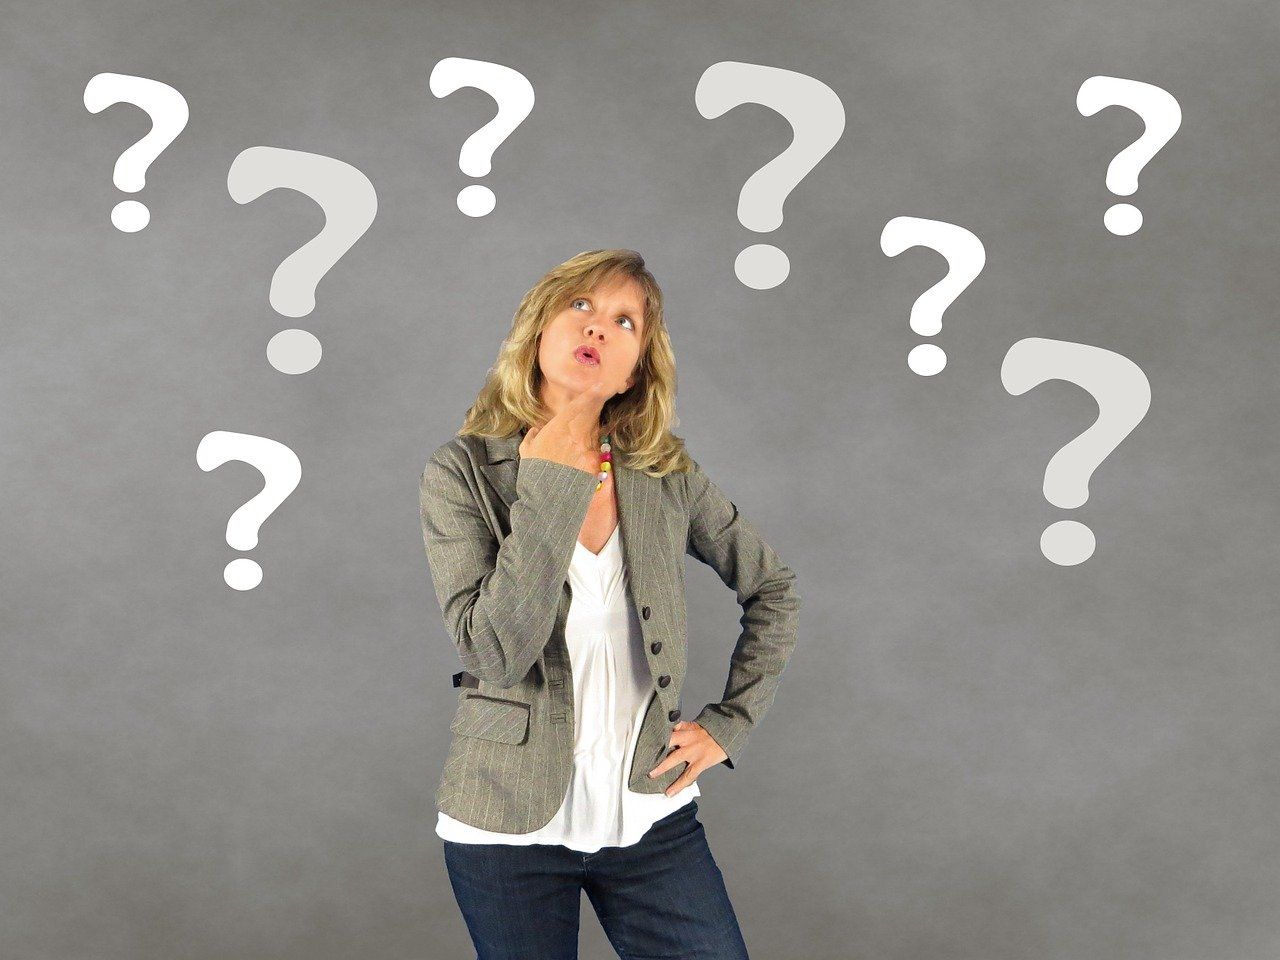 Person standing with a ponderous expression, surrounded by question marks